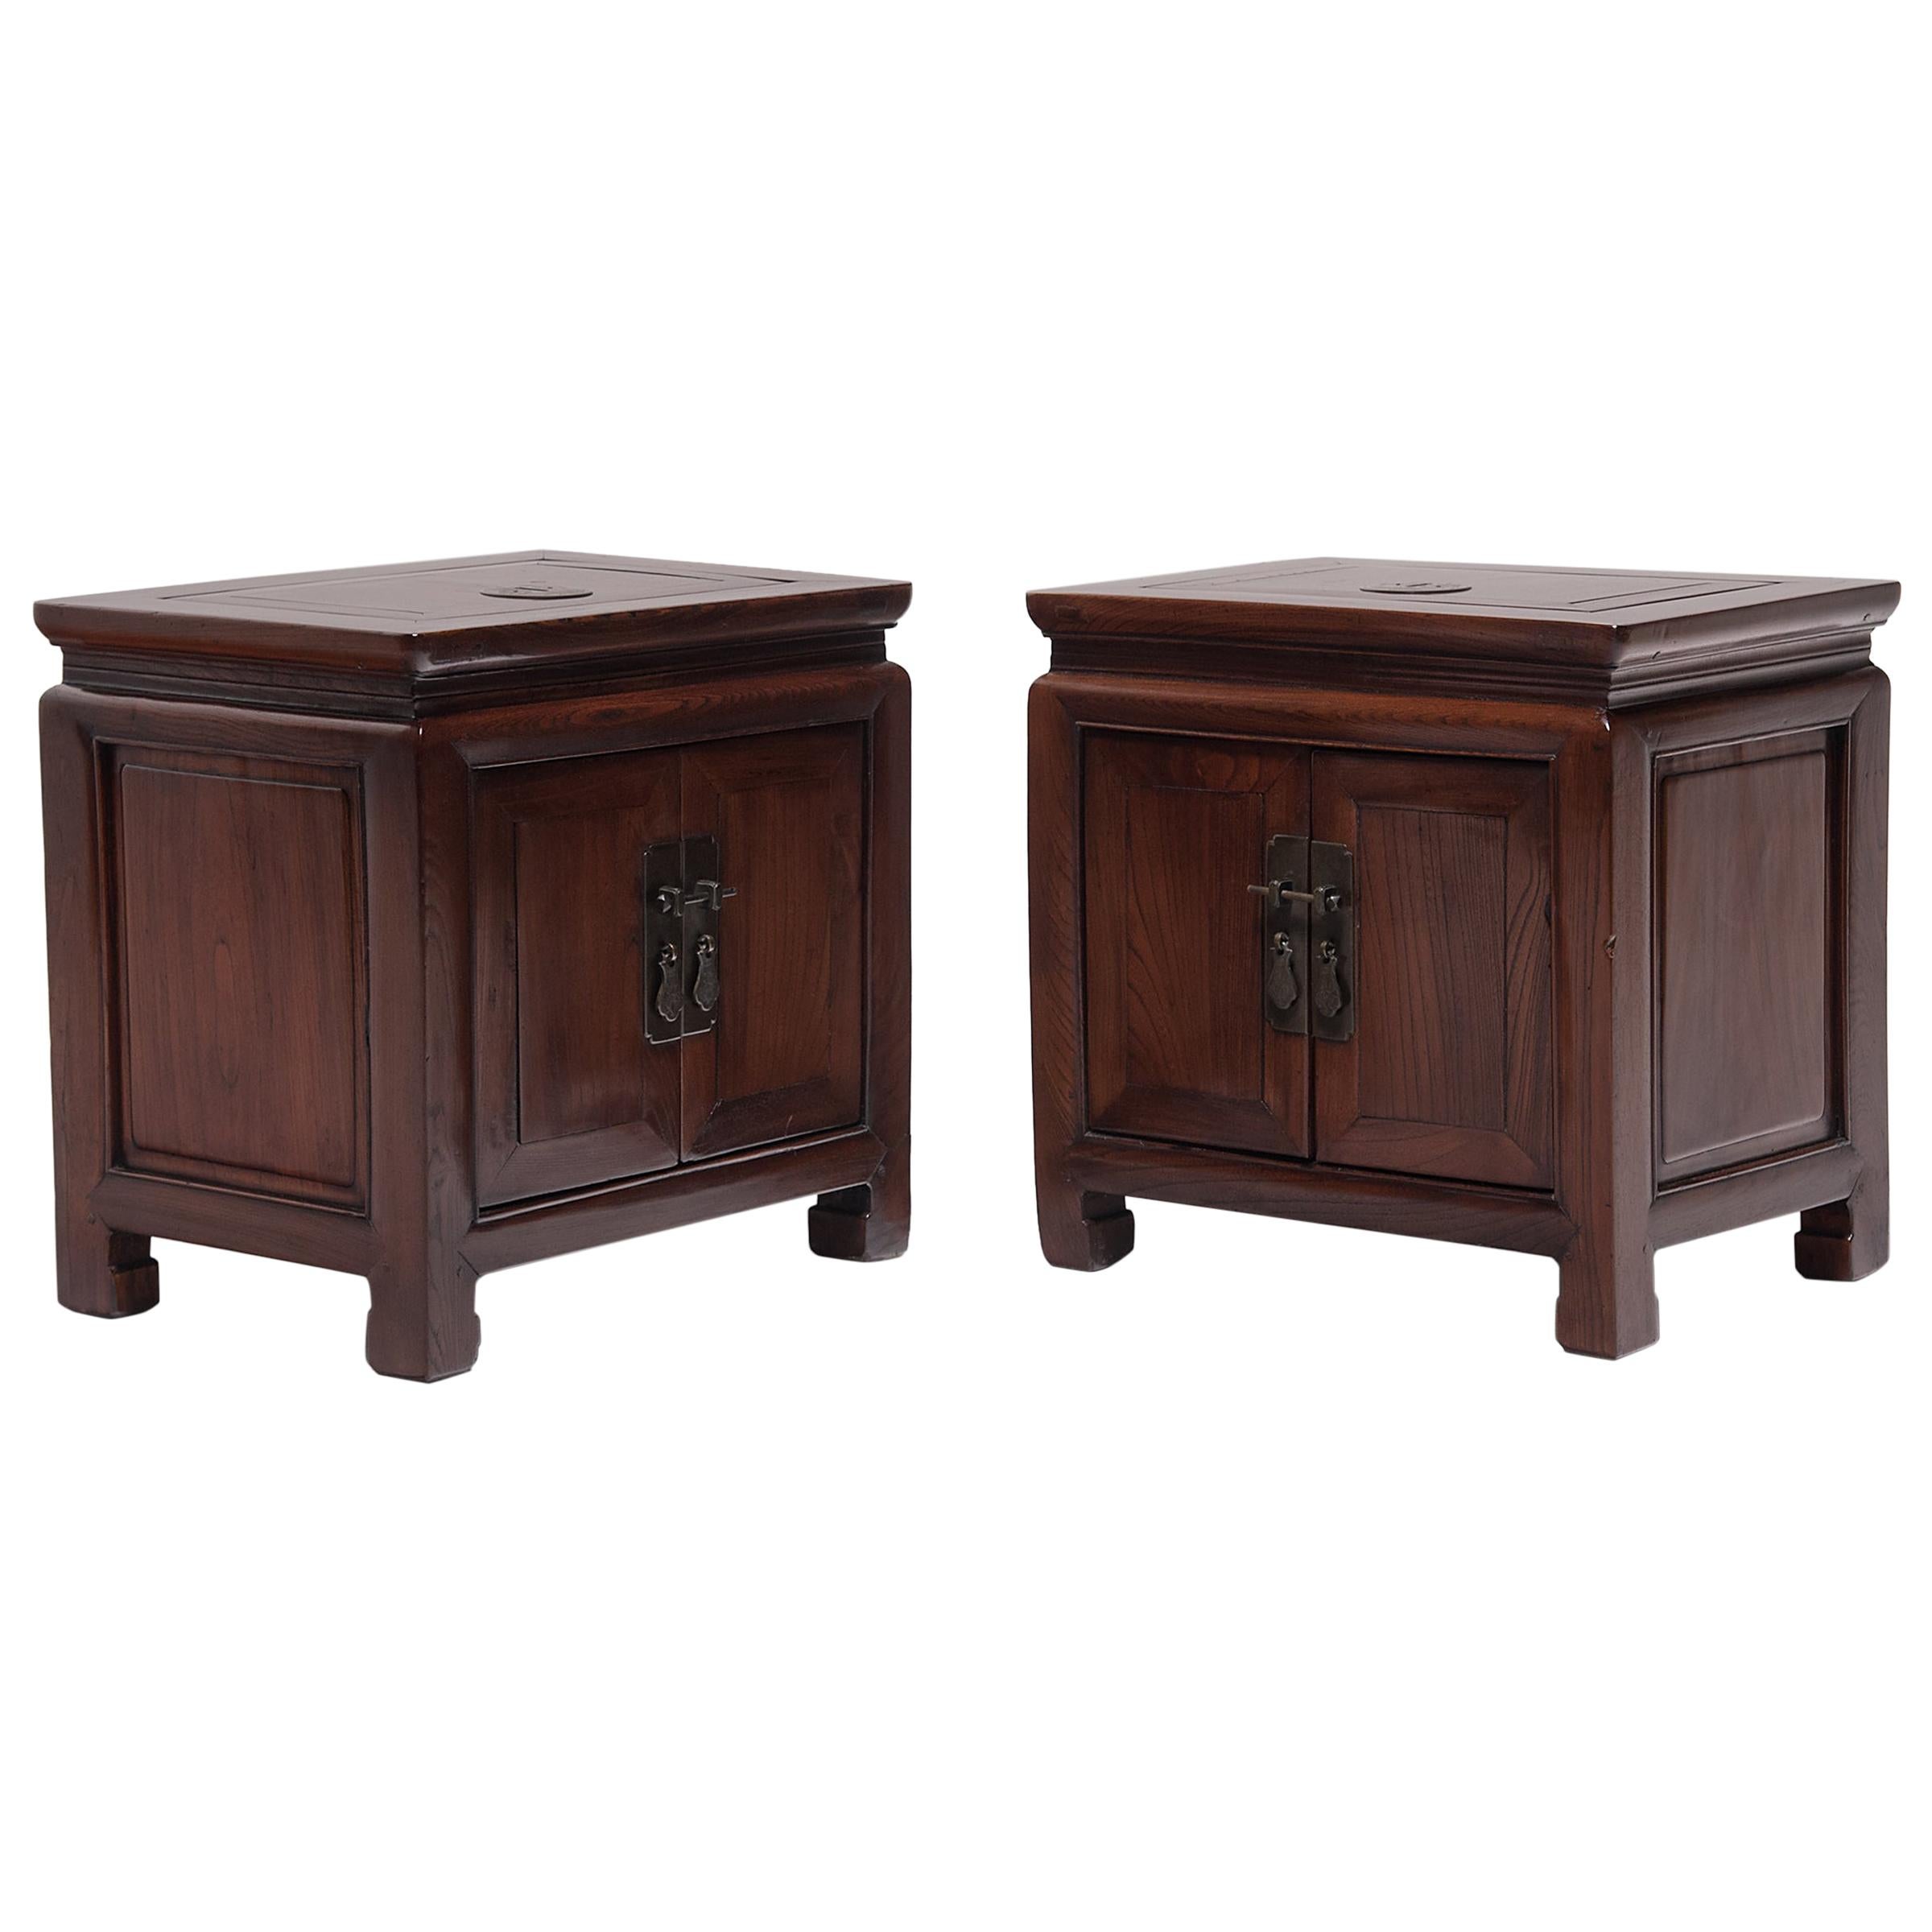 Pair of Chinese Low Banker's Chests, c. 1900